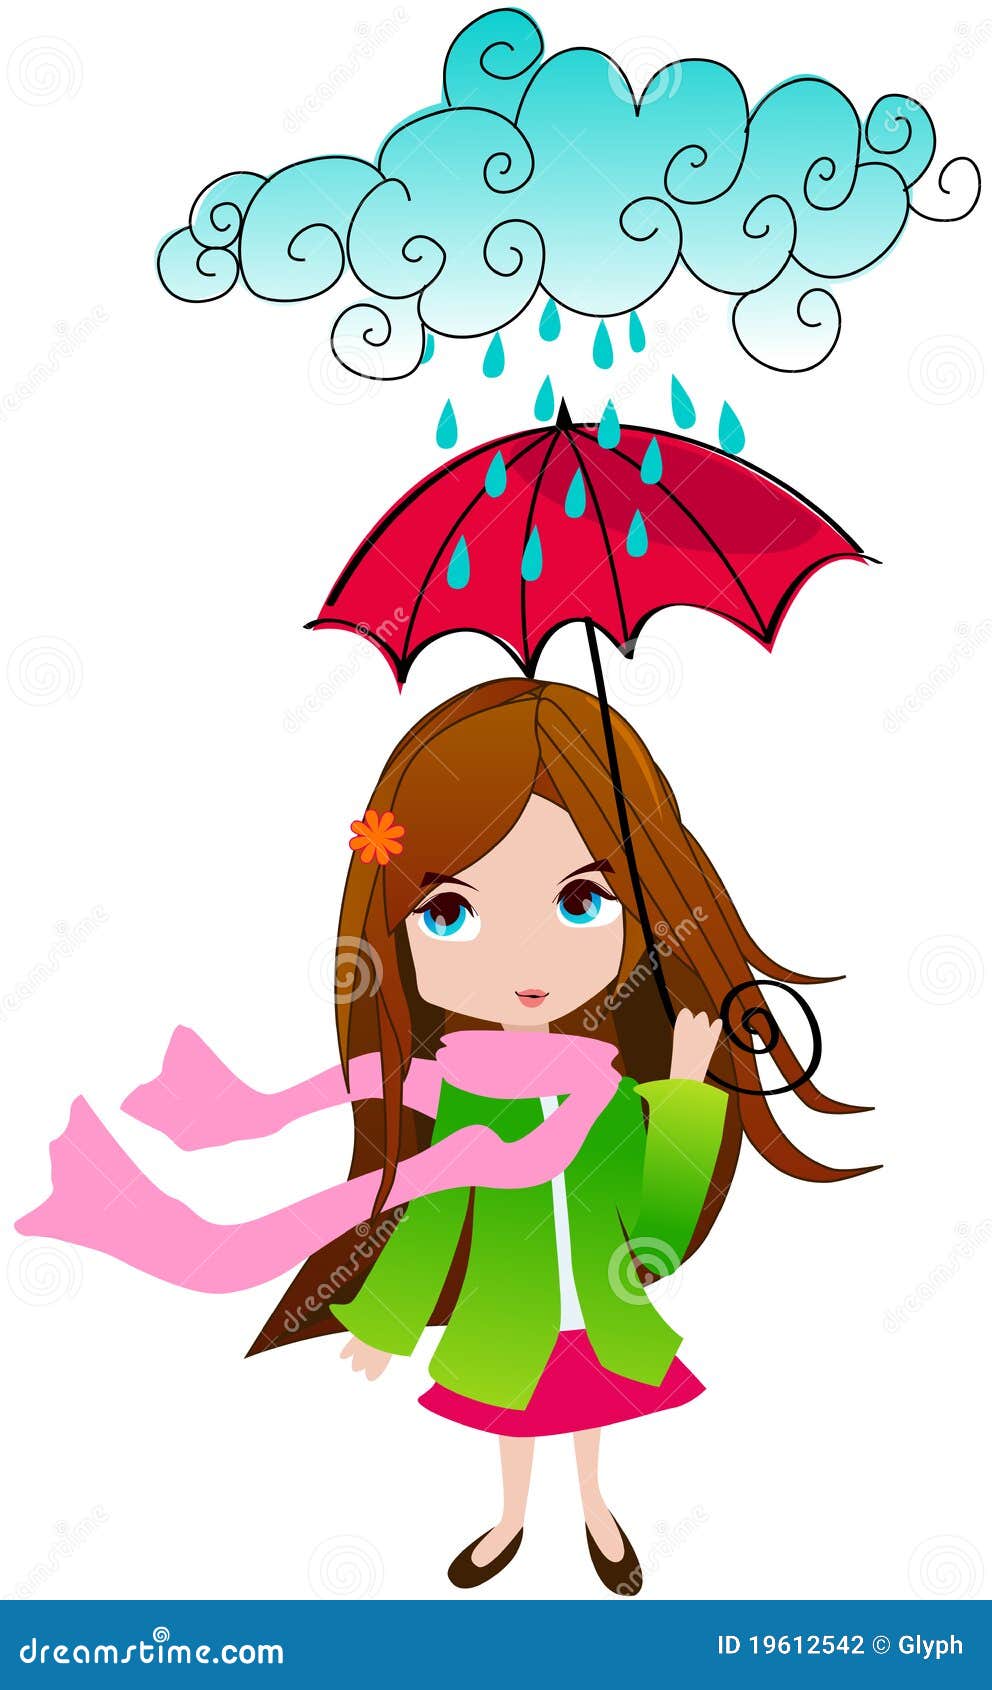 Cute Spring Girl with Umbrella Stock Vector - Illustration of play ...